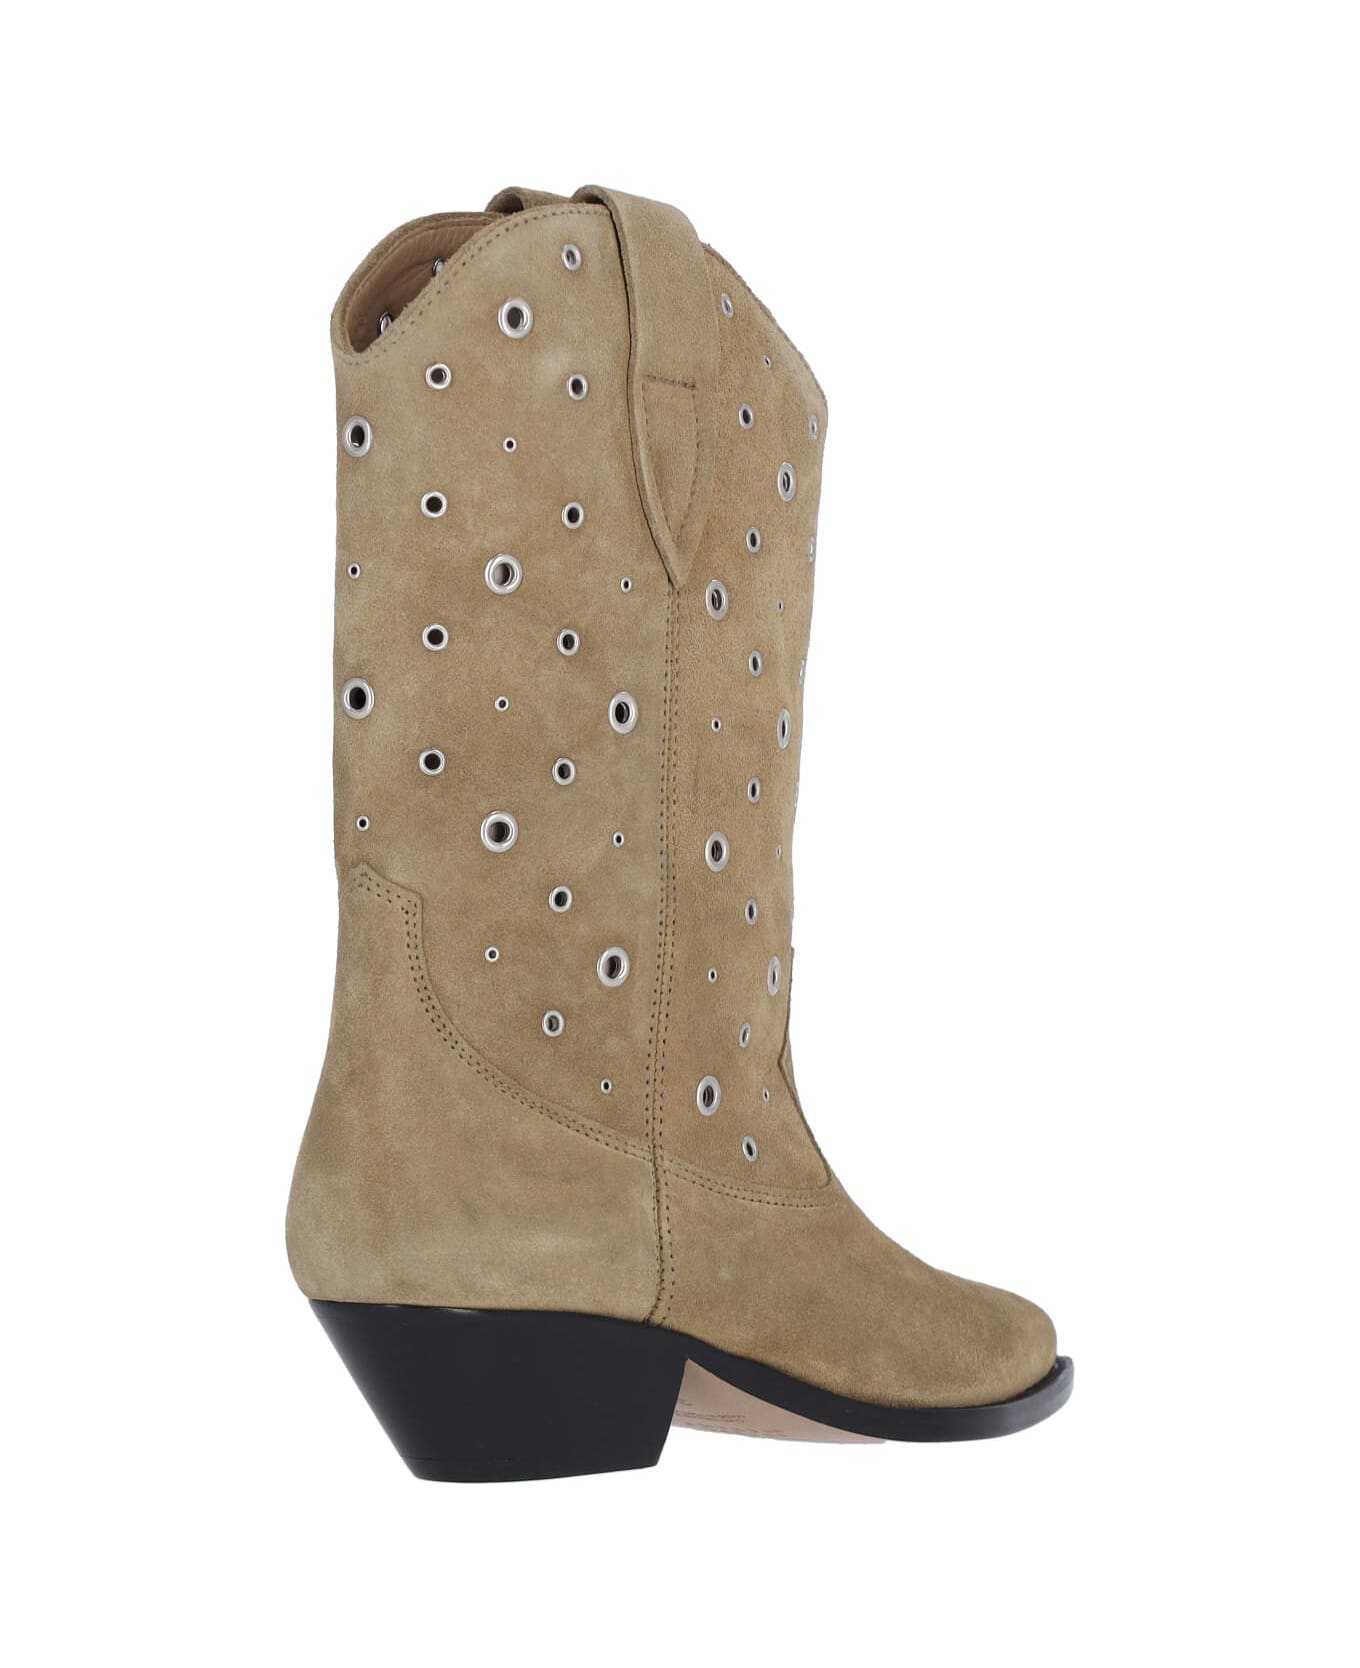 Isabel Marant Western Boots With Studs In Suede - Beige ブーツ